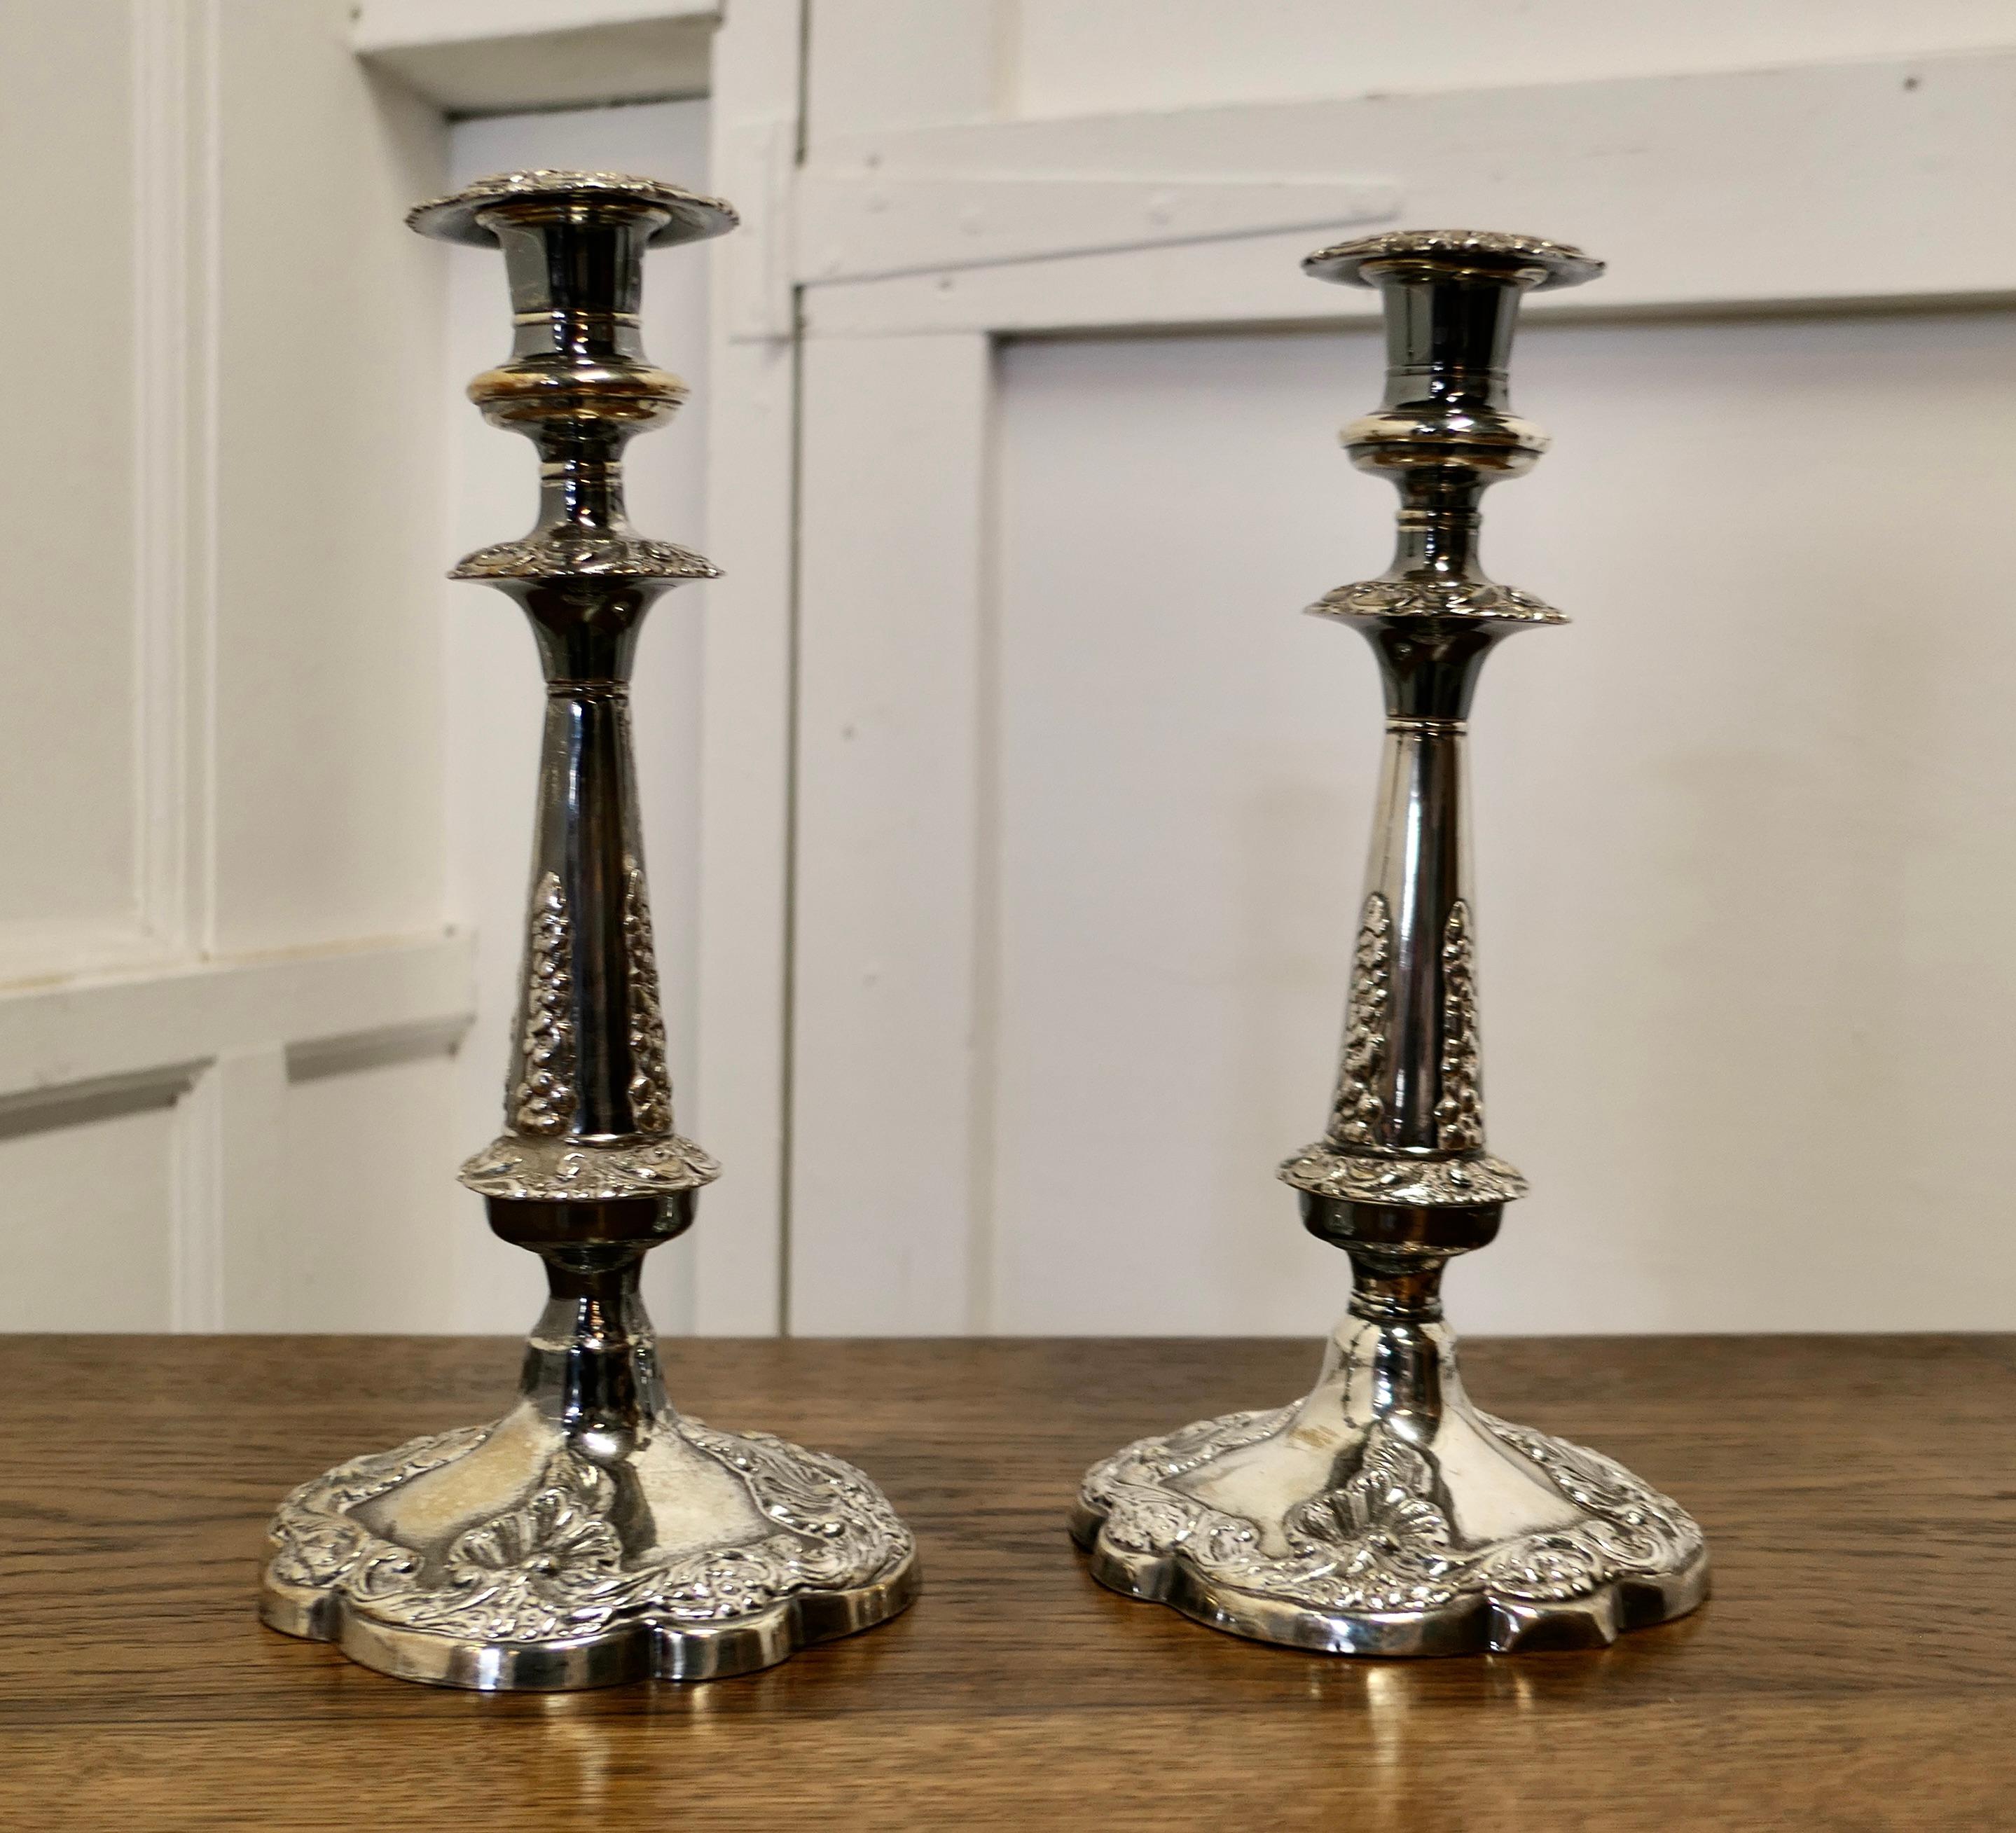 A pair of 19th Century silver plated candle sticks.


The candle sticks are very decorative they have lift-out drip pans and are decorated with shells, scrolls and leaves. 
The candle sticks are in good antique condition, they are well cast, and